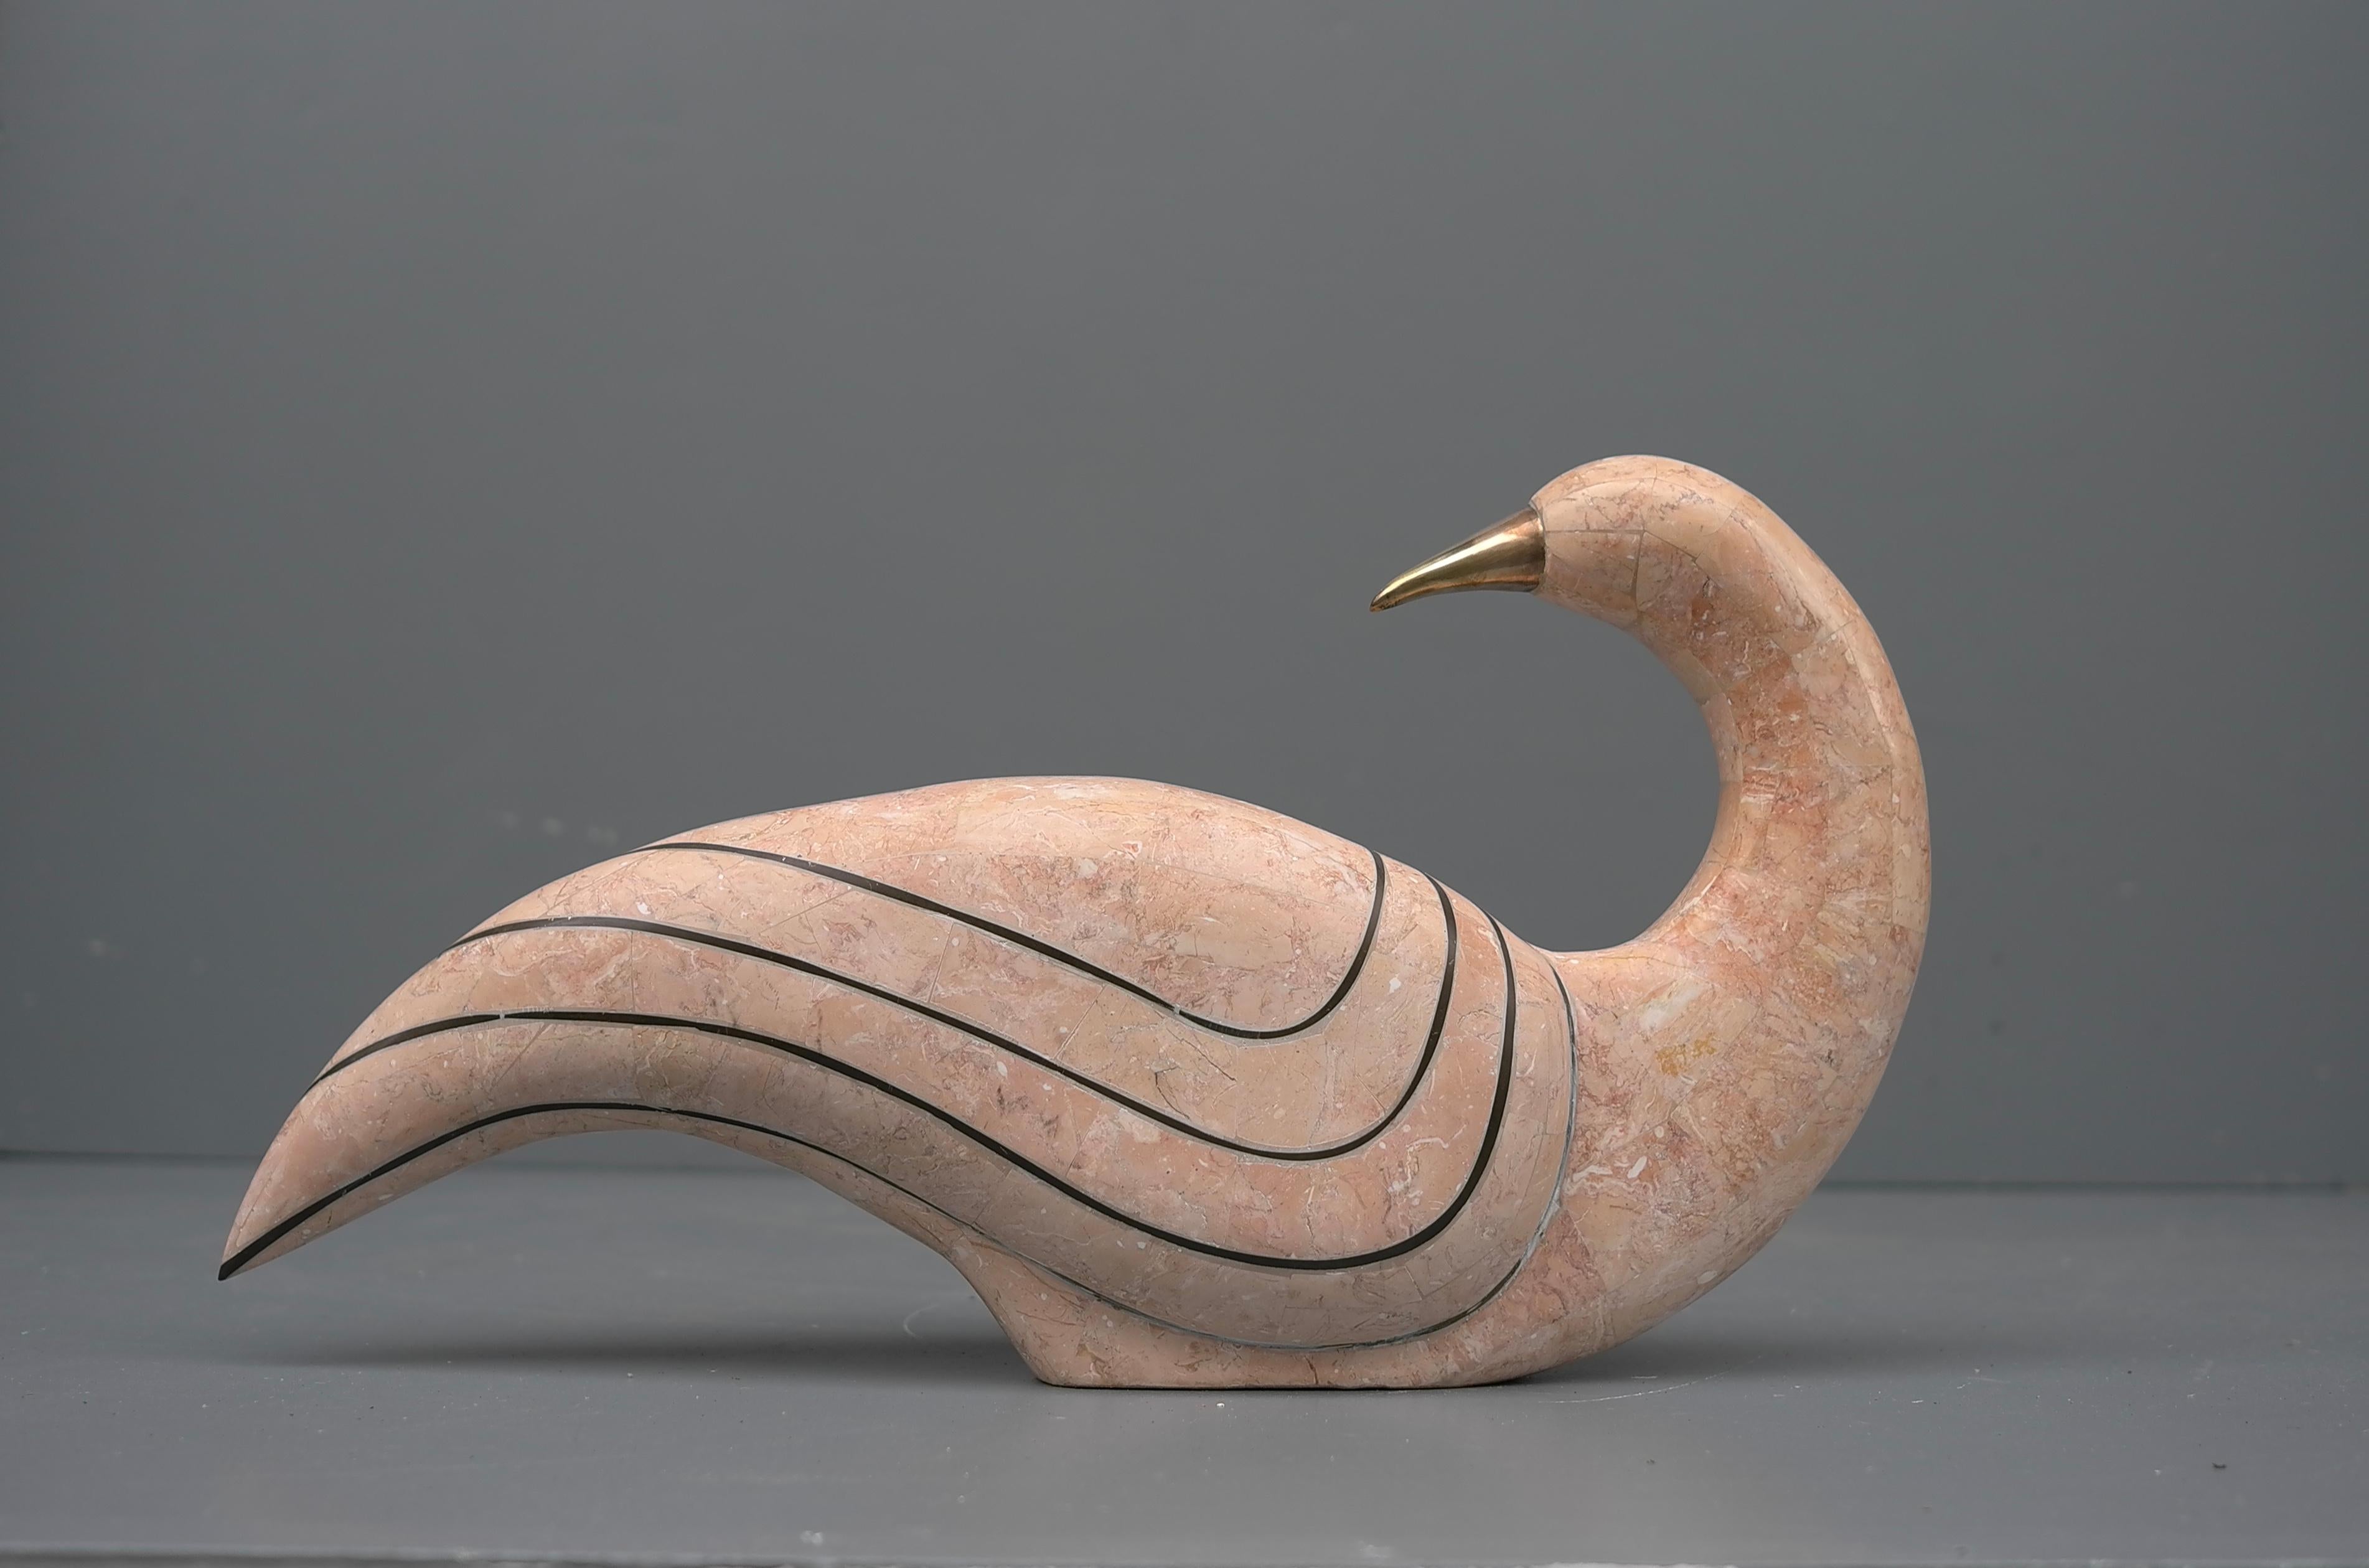 Large Pink Tessellated Stone Abstract Bird Sculpture by Maitland Smith 1970's In Good Condition For Sale In Den Haag, NL